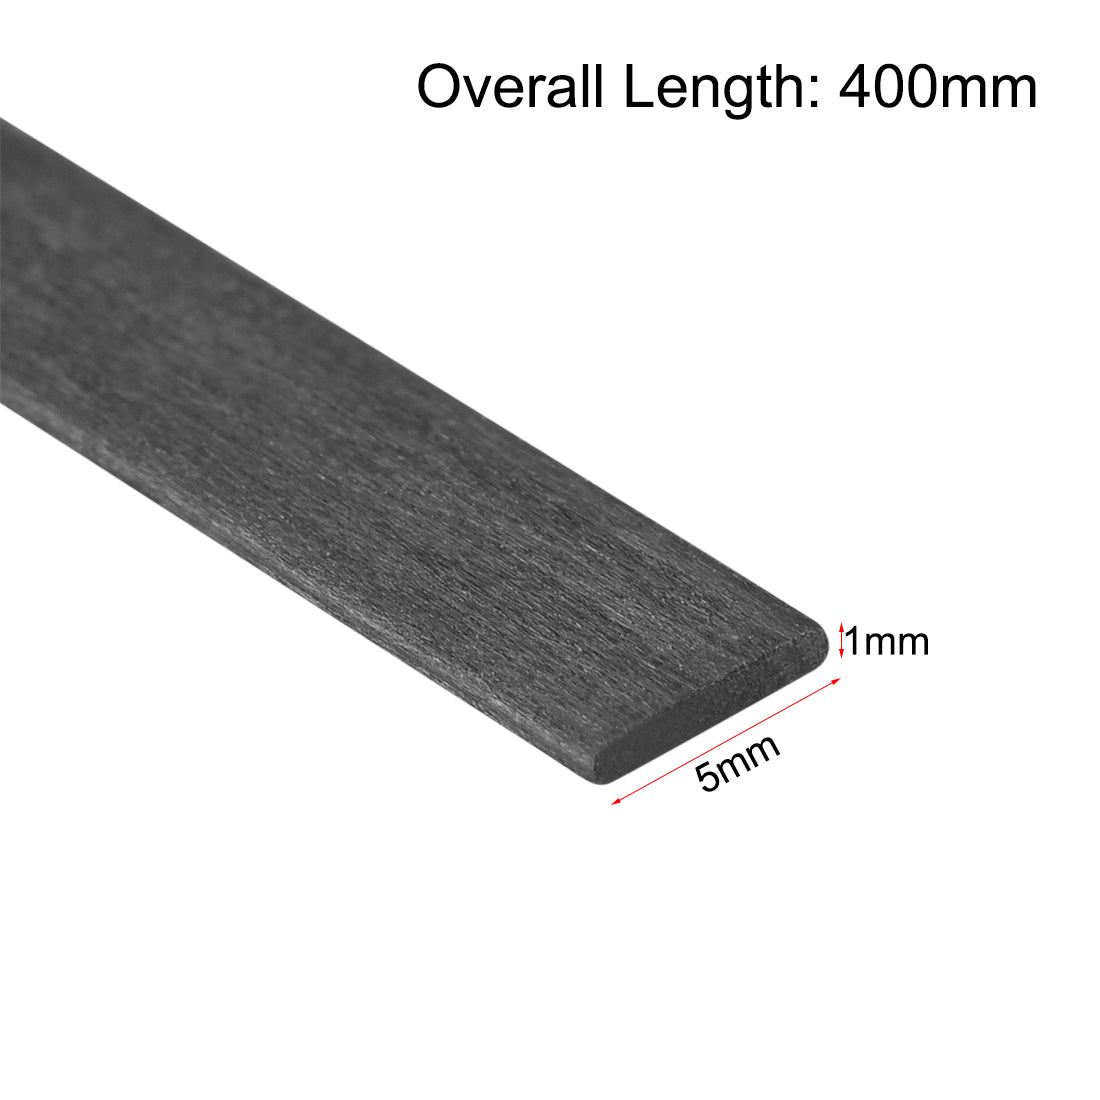 uxcell Uxcell Carbon Fiber Strip Bars 1x5mm 400mm Length Pultruded Carbon Fiber Strips for Kites, RC Airplane 2 Pcs